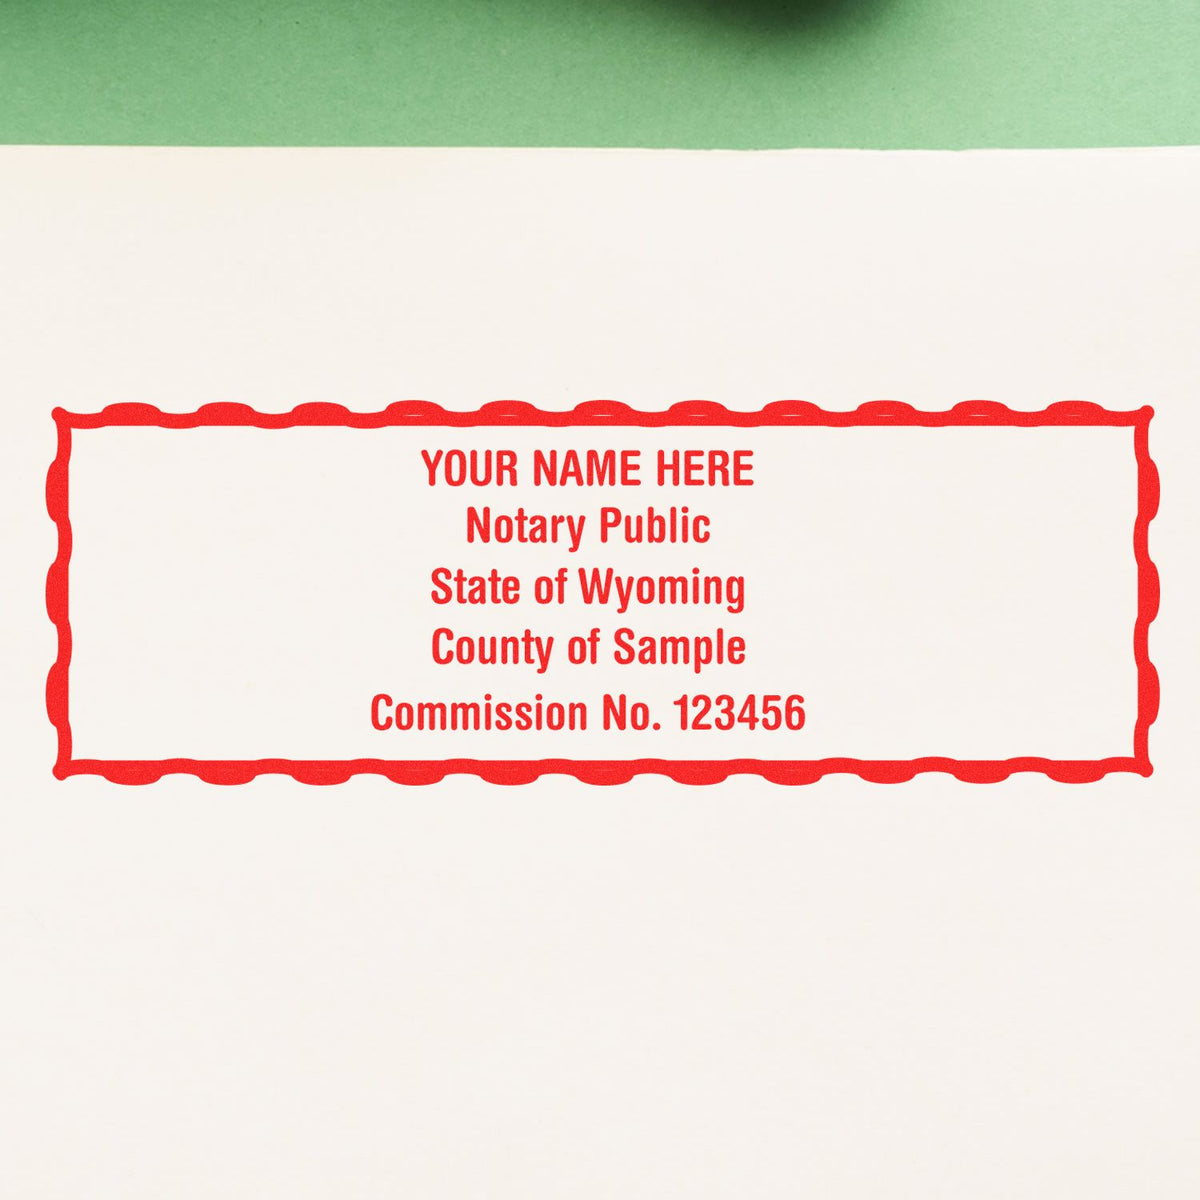 Another Example of a stamped impression of the Super Slim Wyoming Notary Public Stamp on a piece of office paper.